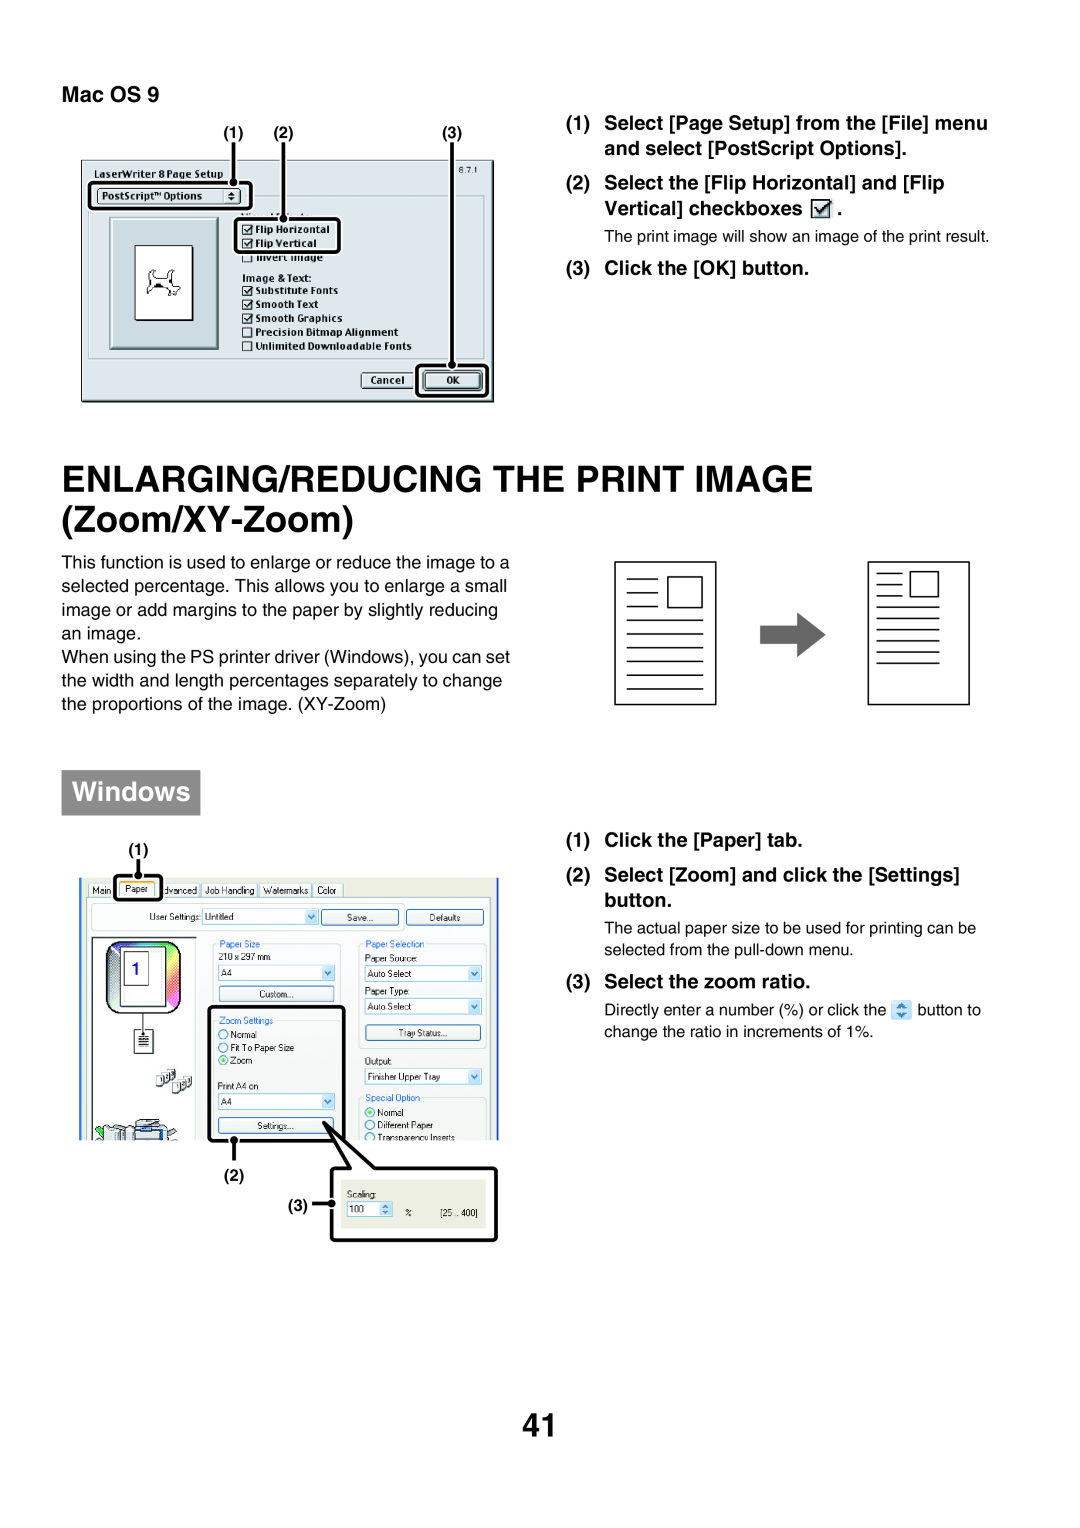 Sharp MX-5500N ENLARGING/REDUCING THE PRINT IMAGE Zoom/XY-Zoom, and select PostScript Options, Vertical checkboxes, Mac OS 